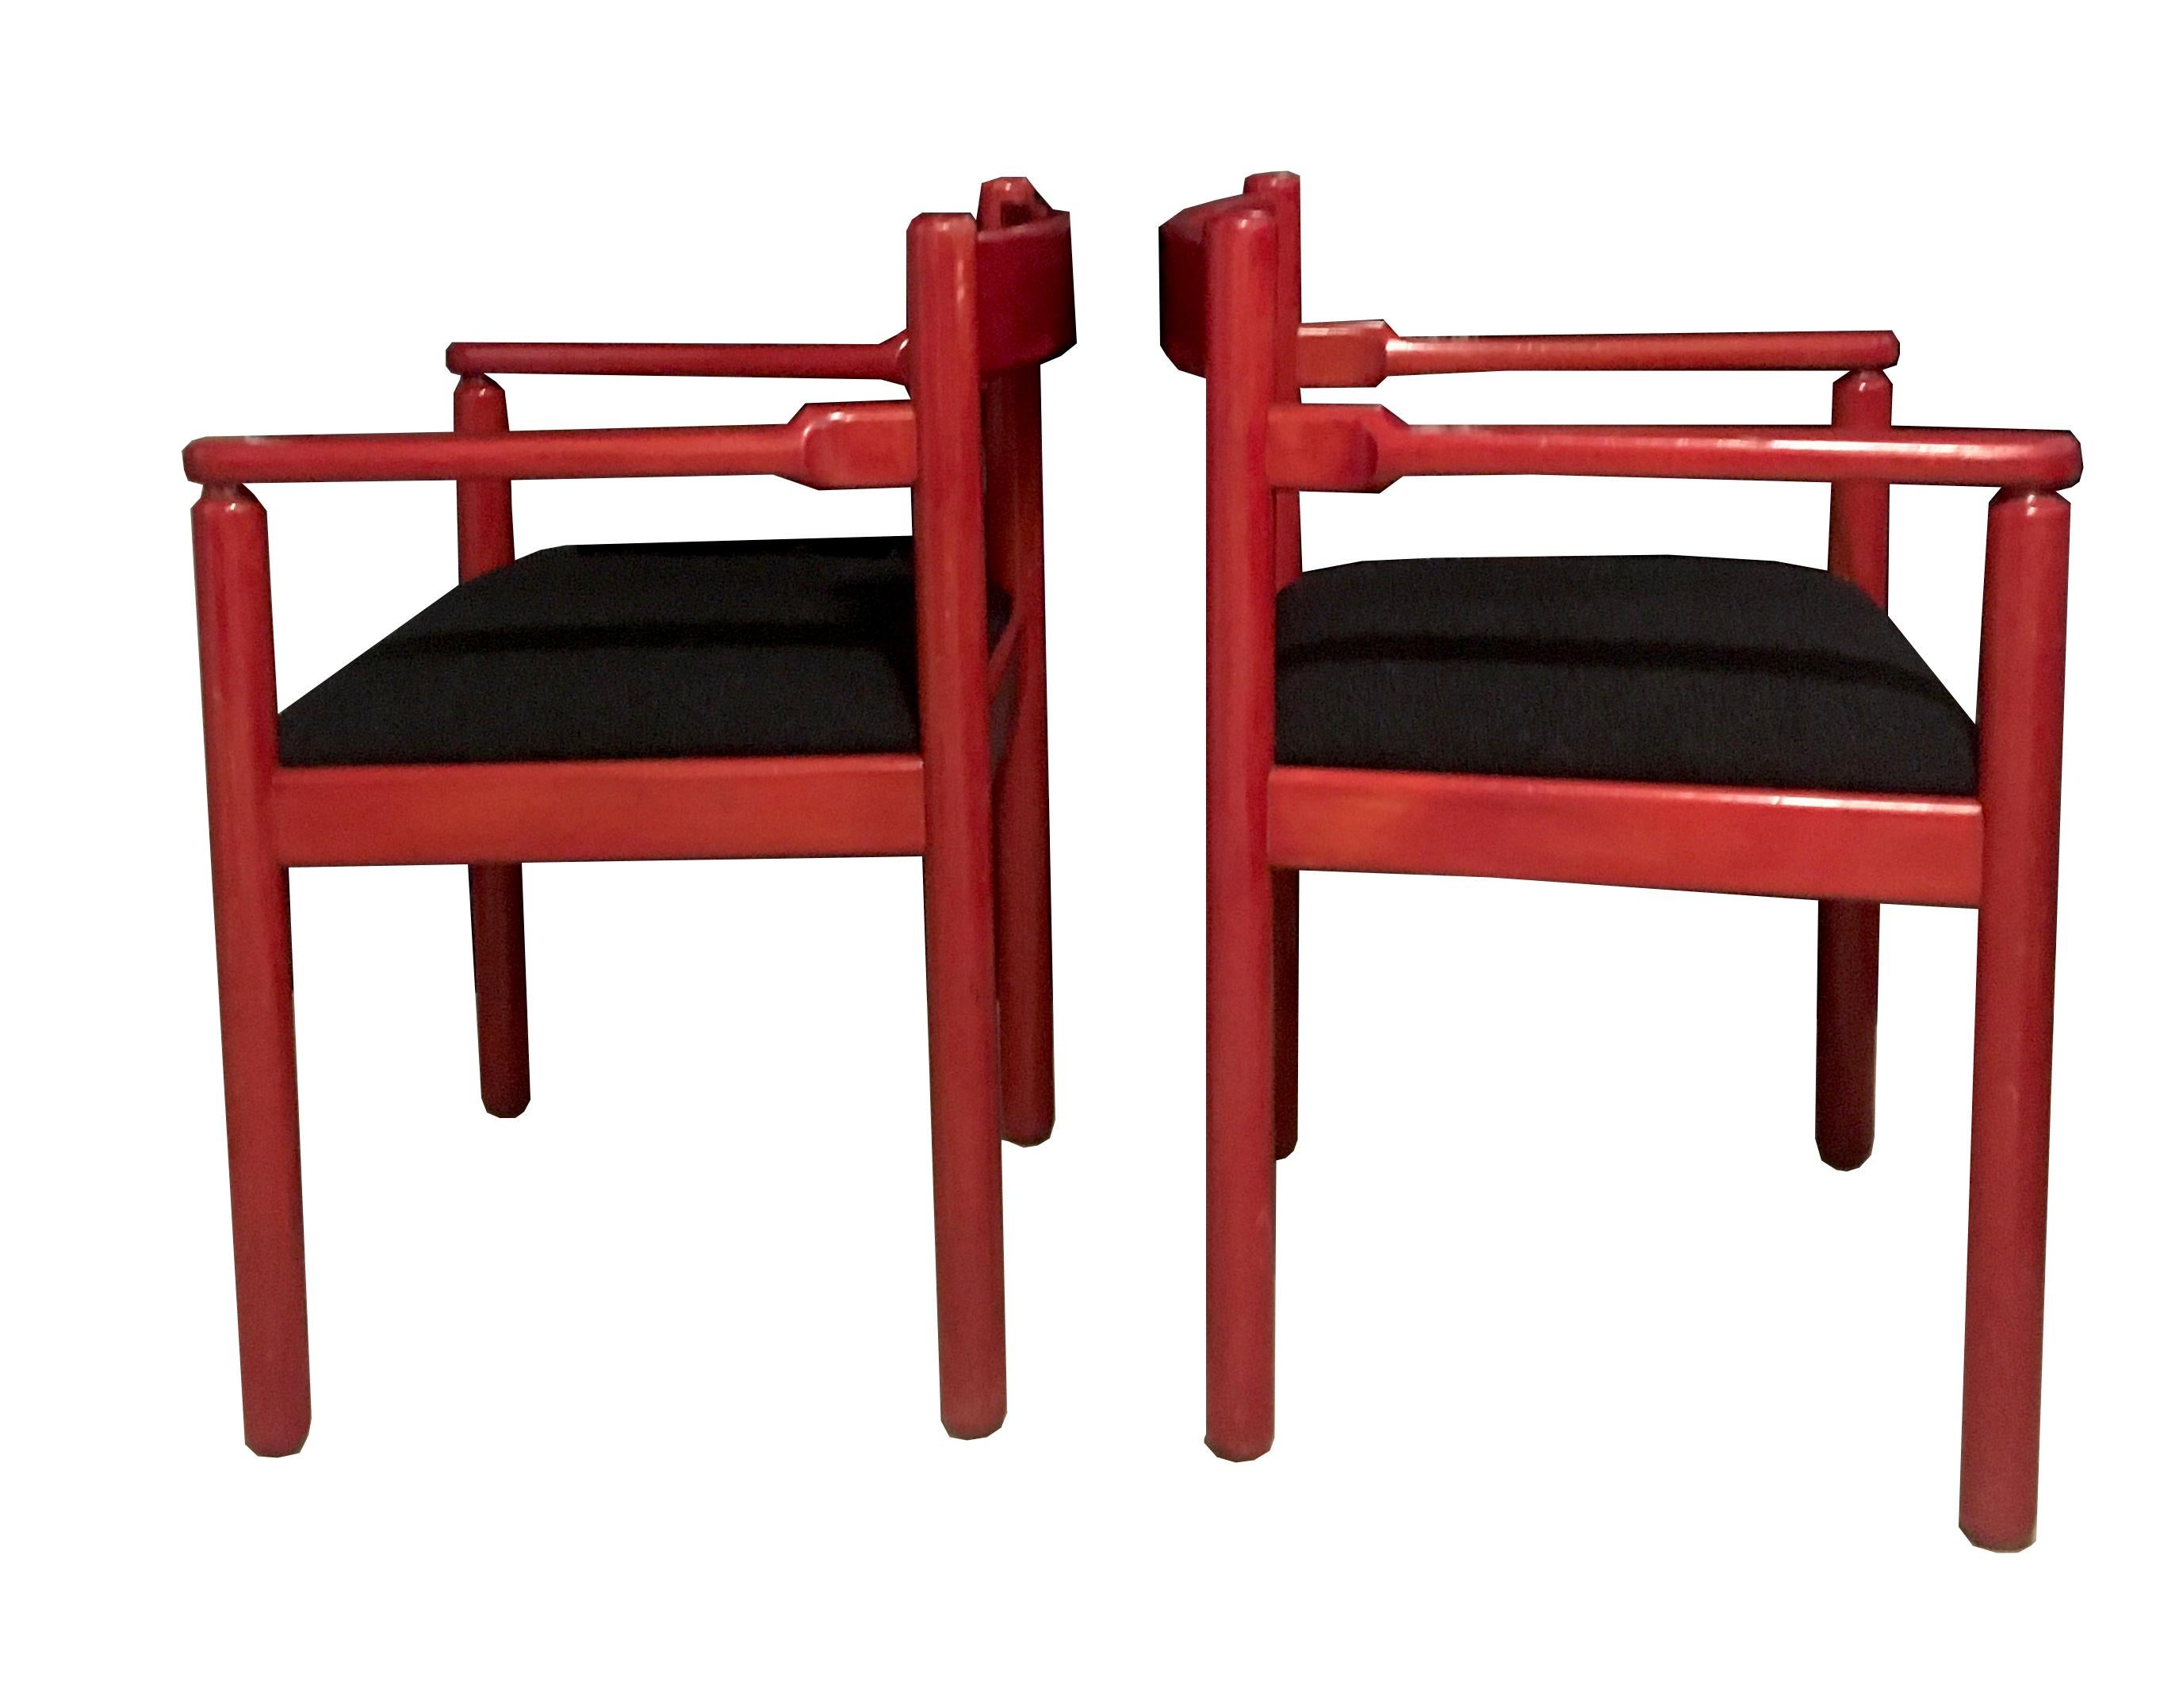 Pair of dining room chairs designed by Vico Magistretti for Cassina manufacture in 1964, Italy.
Black fabric seating and red lacquered wooden frame.